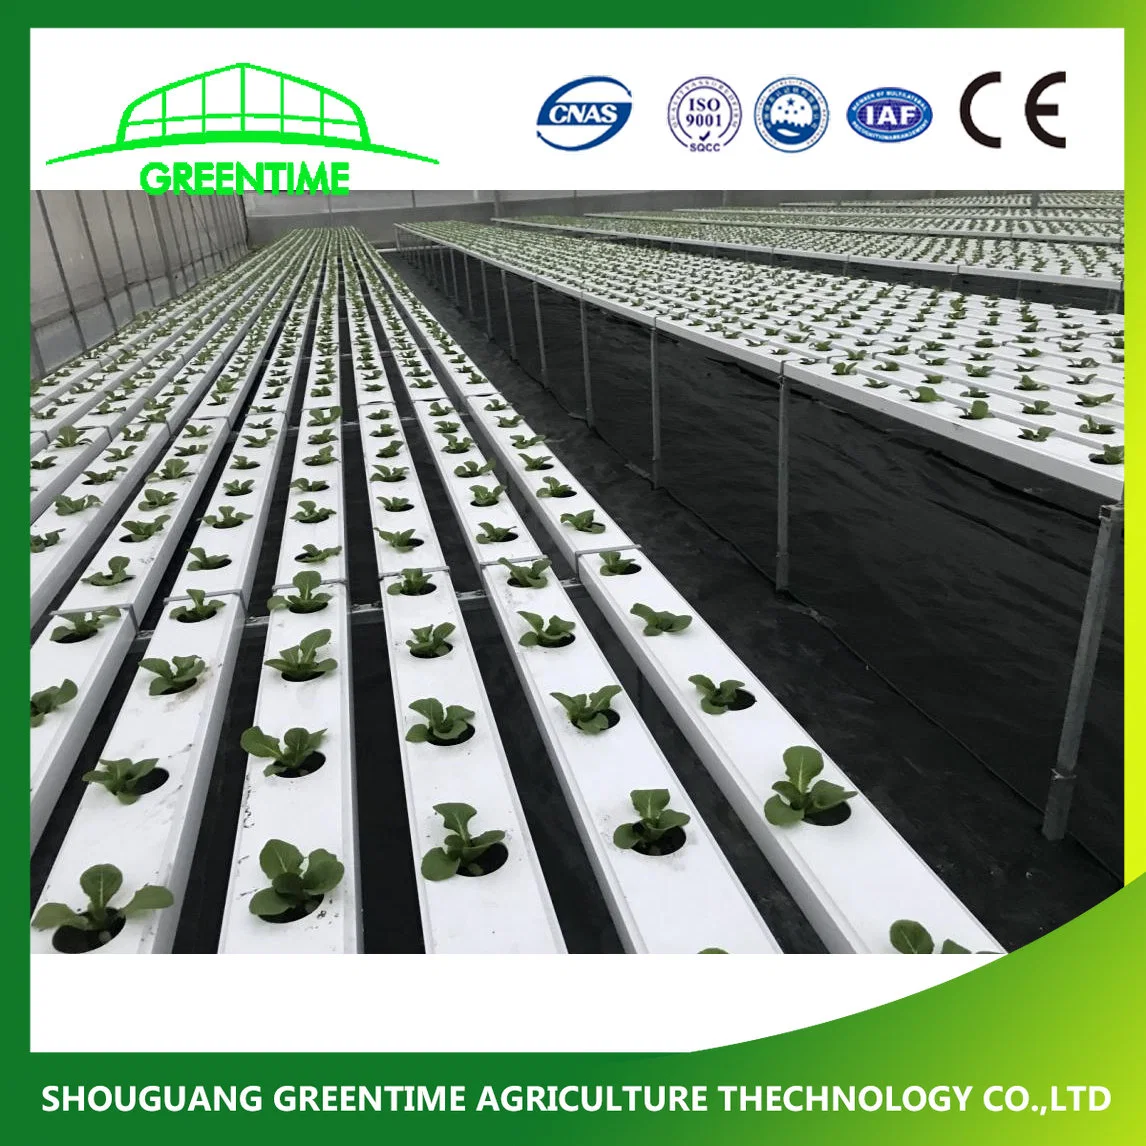 Salad Vegetable Lettuce Growing Nft Hydroponics Greenhouse Systems Vertical Type with Irrigation